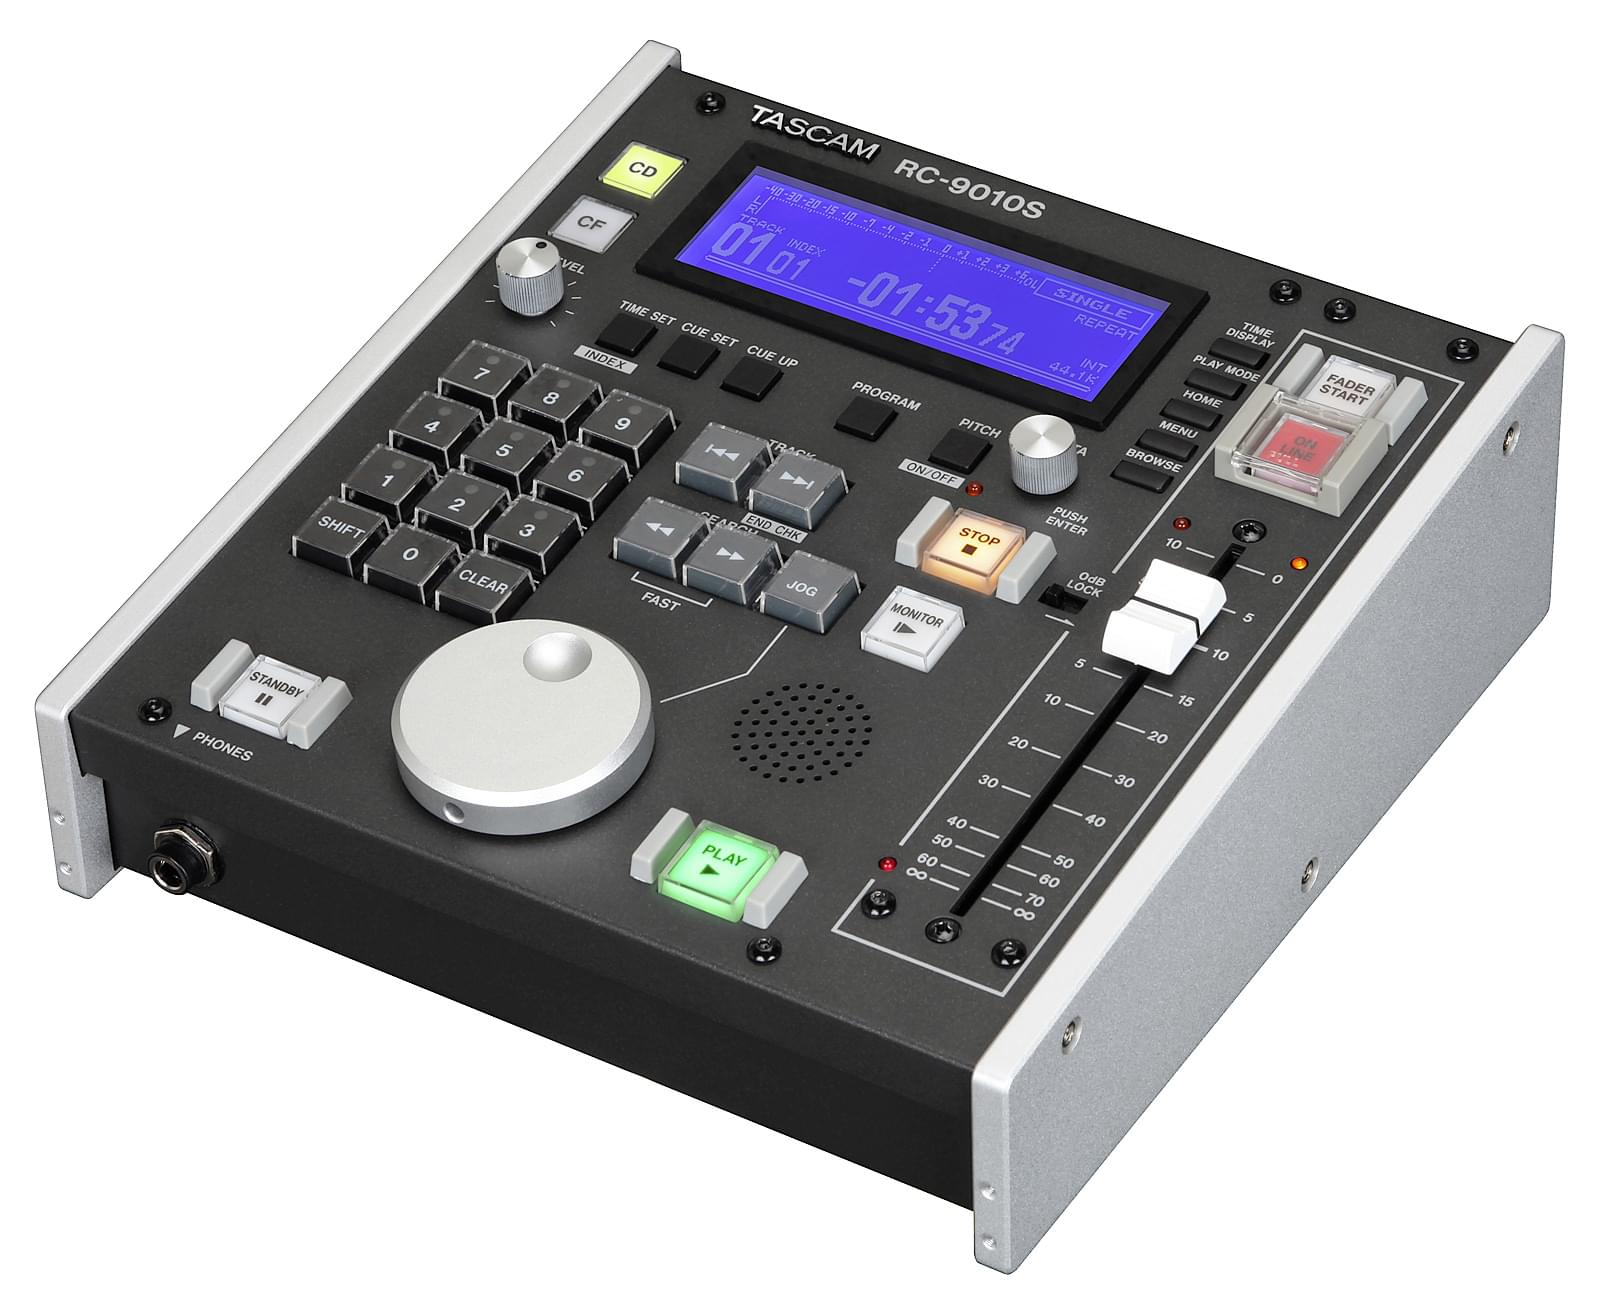 Tascam Europe  Audio Recording Devices for Professionals and Hobbyists